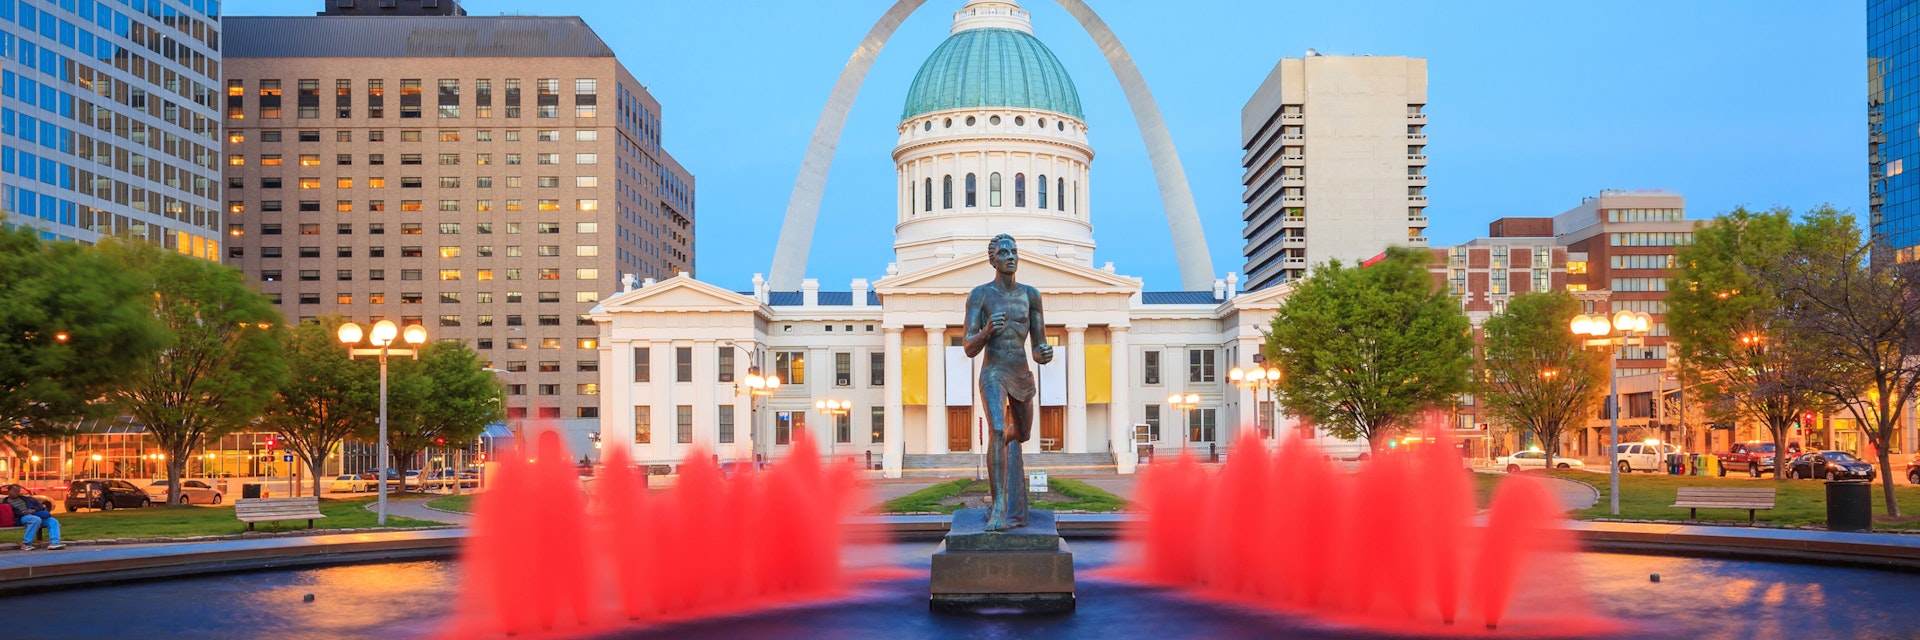 Old Courthouse in downtown St. Louis.; Shutterstock ID 277224263; Your name (First / Last): Lauren Keith; GL account no.: 65050; Netsuite department name: Content Asset; Full Product or Project name including edition: Guides Project Eastern USA